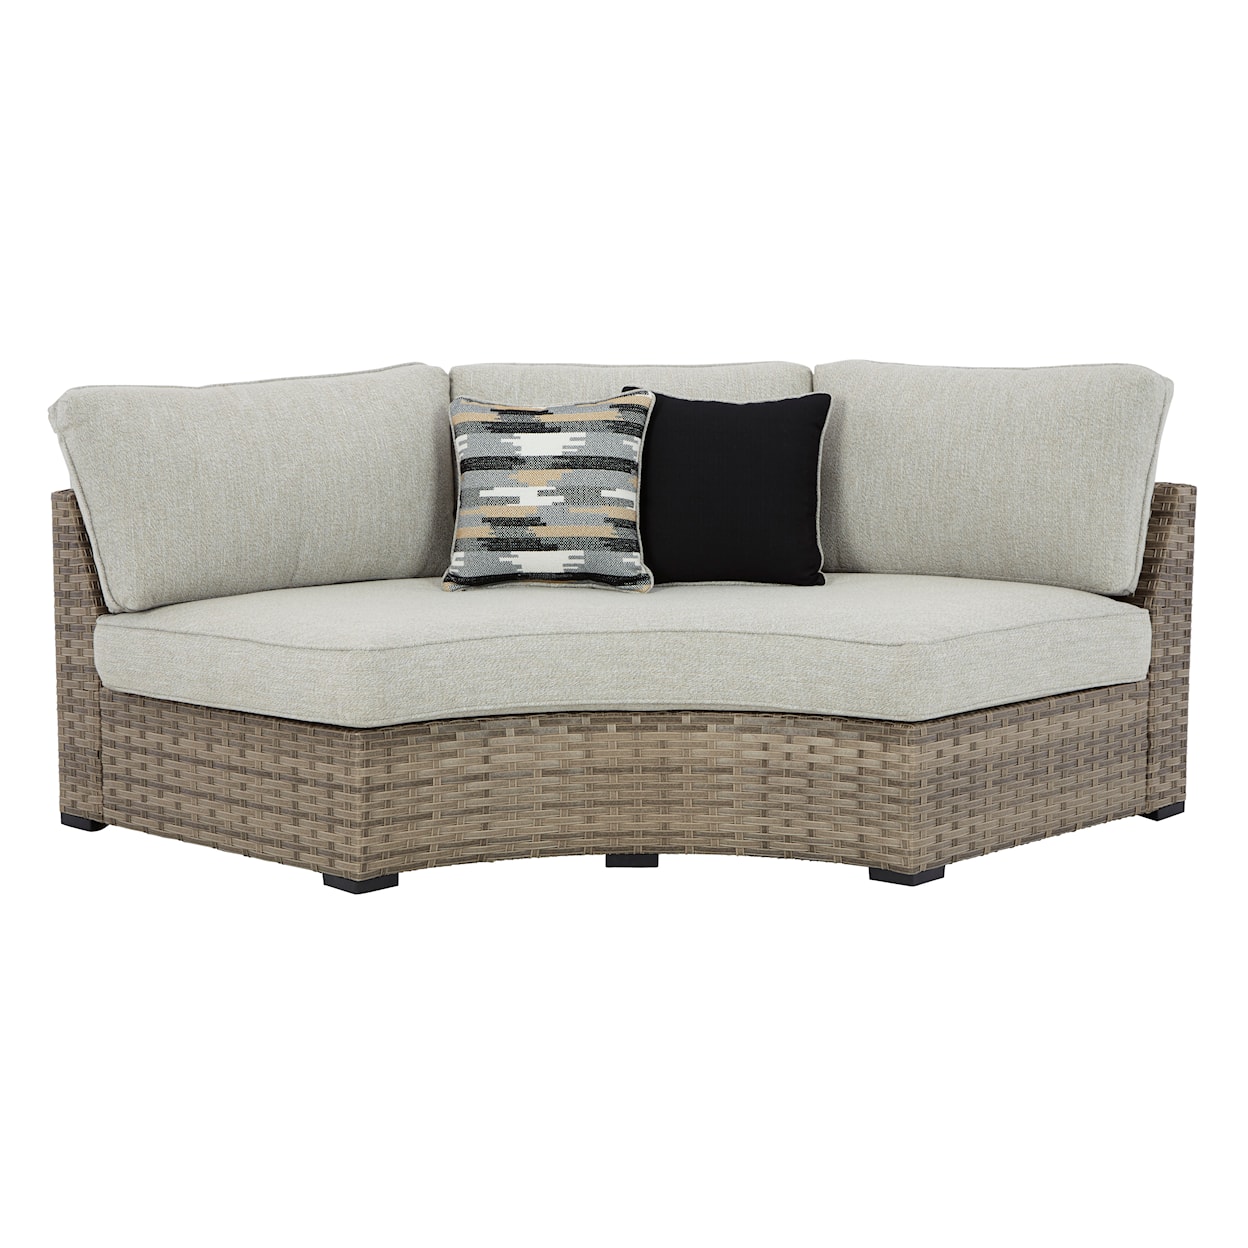 Signature Design by Ashley Calworth Outdoor Curved Loveseat with Cushion